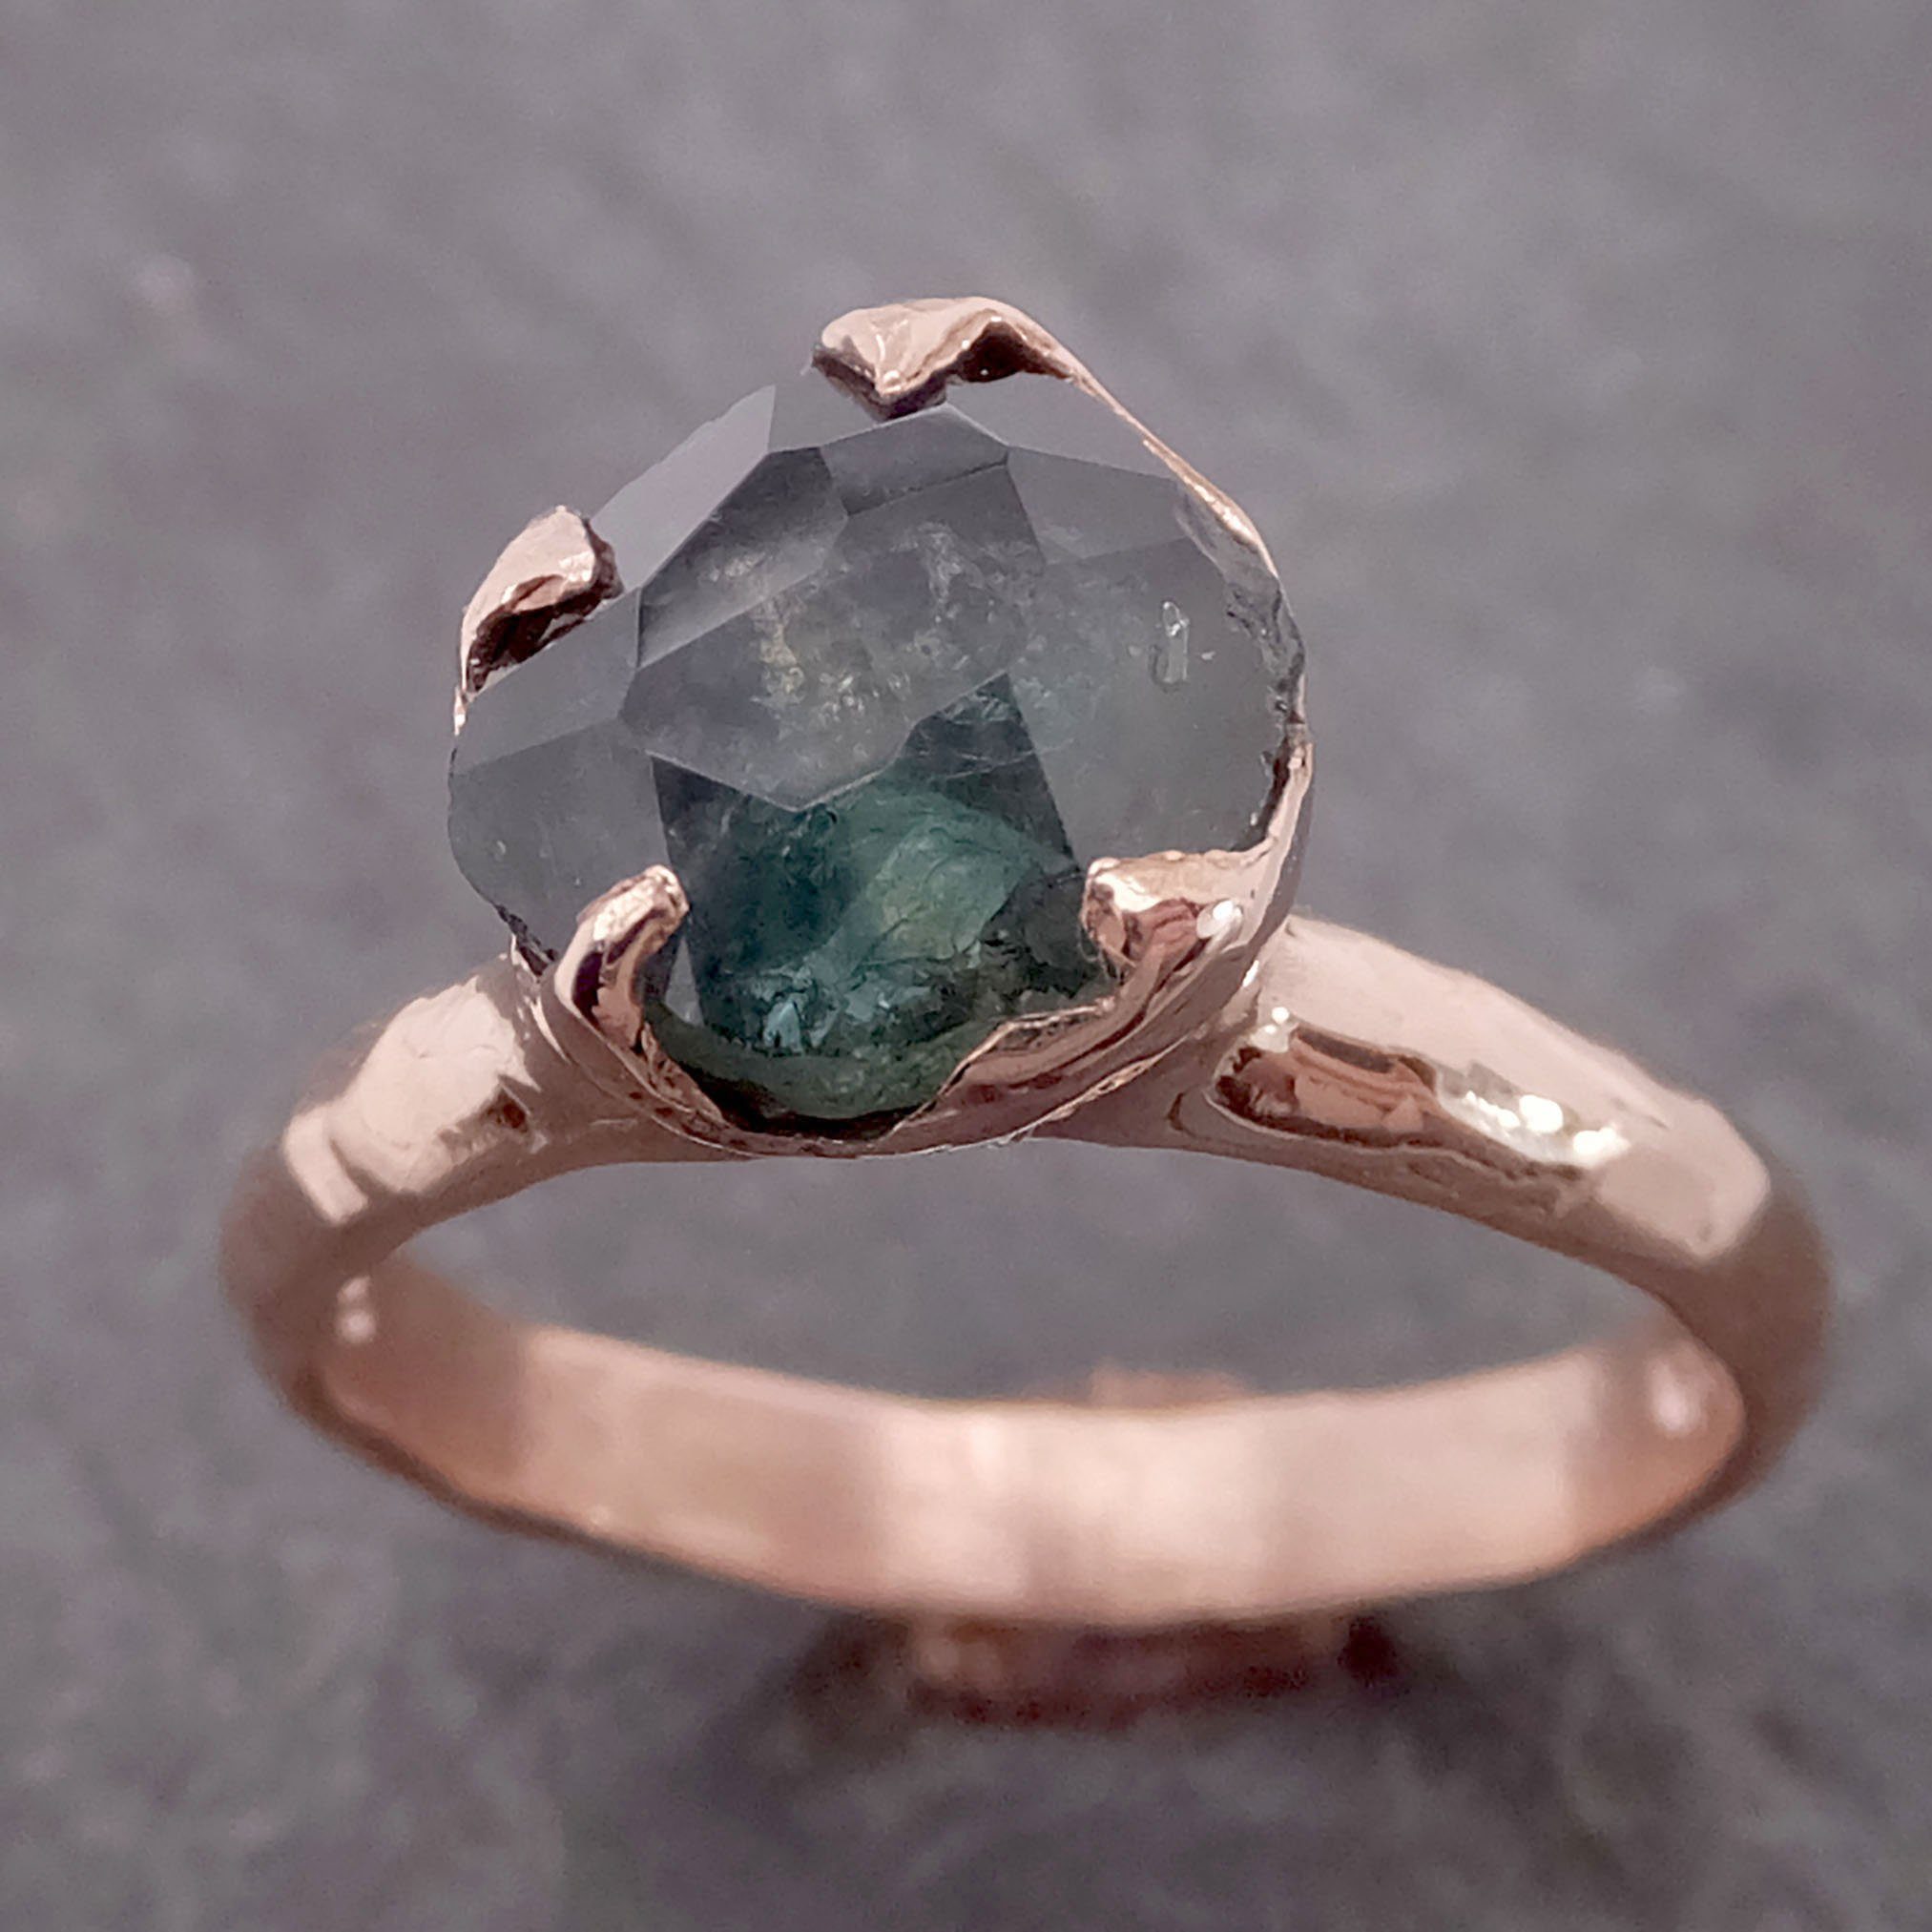 montana sapphire partially faceted solitaire 14k rose gold engagement ring wedding ring custom one of a kind blue gemstone ring 2138 Alternative Engagement